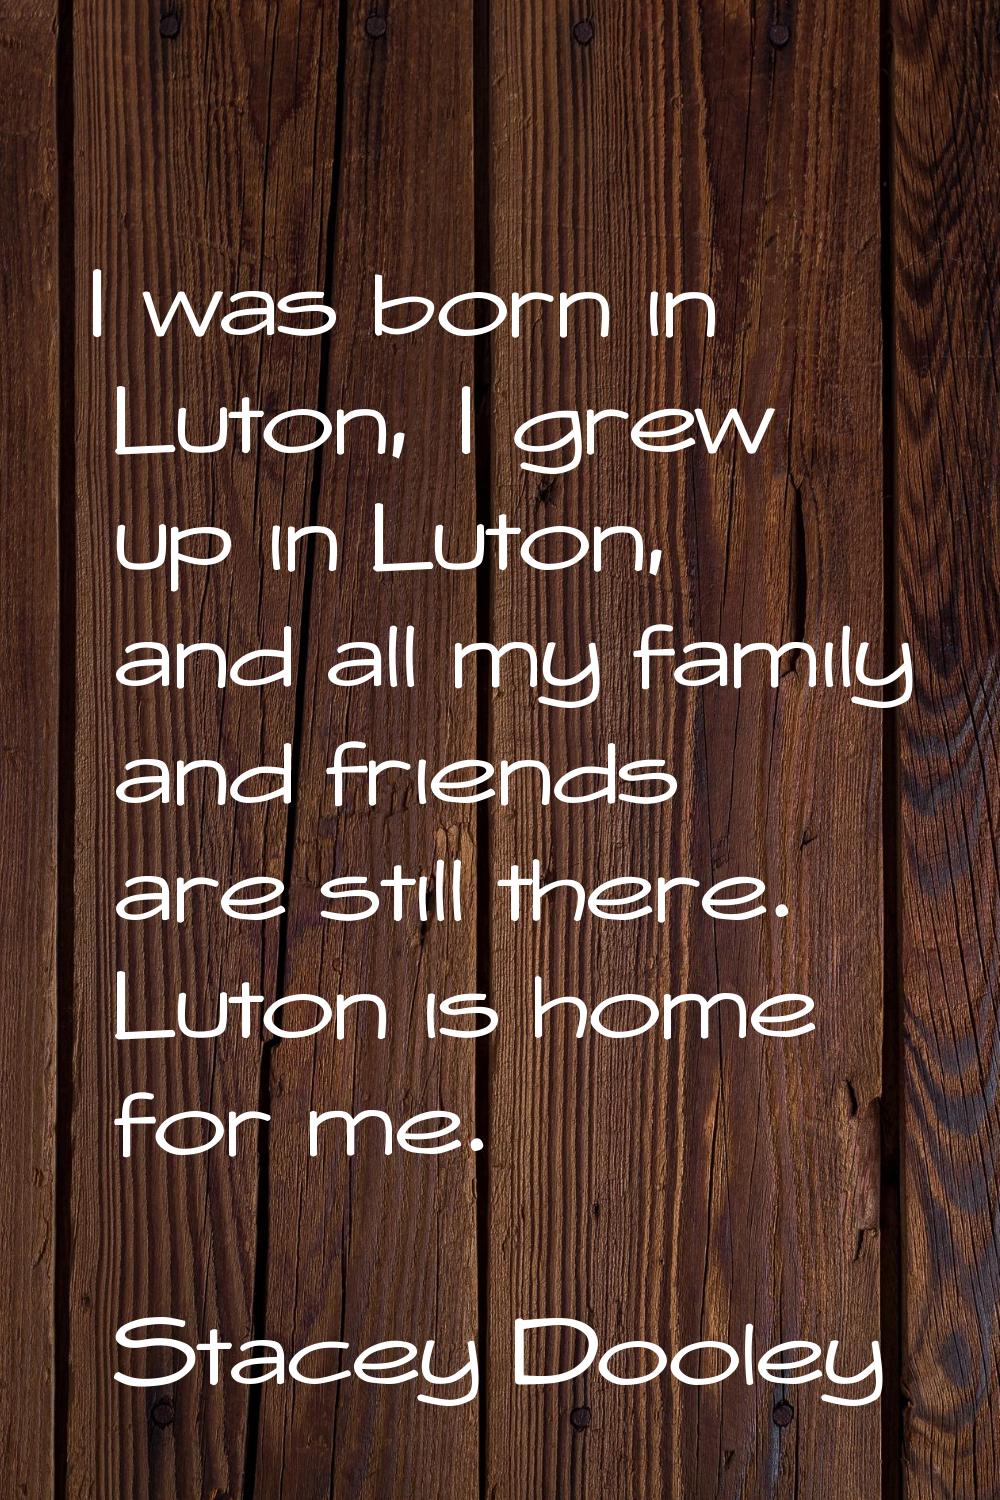 I was born in Luton, I grew up in Luton, and all my family and friends are still there. Luton is ho